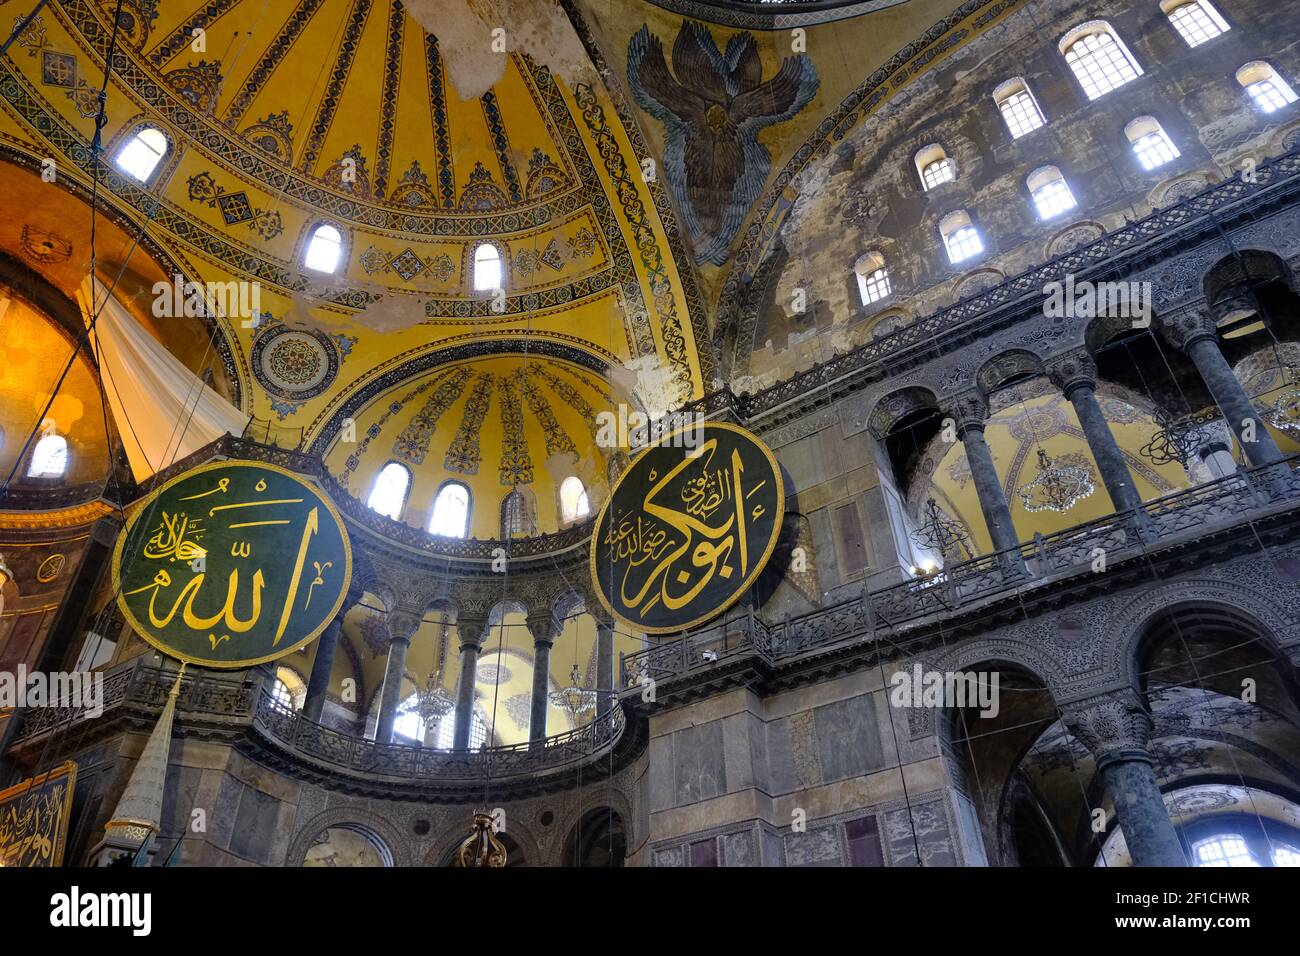 Hagia sophia mosque inside.many etching and gravures name of prophet Muhammad, god, ancient candles. Architectural details of dome and ancient windows Stock Photo